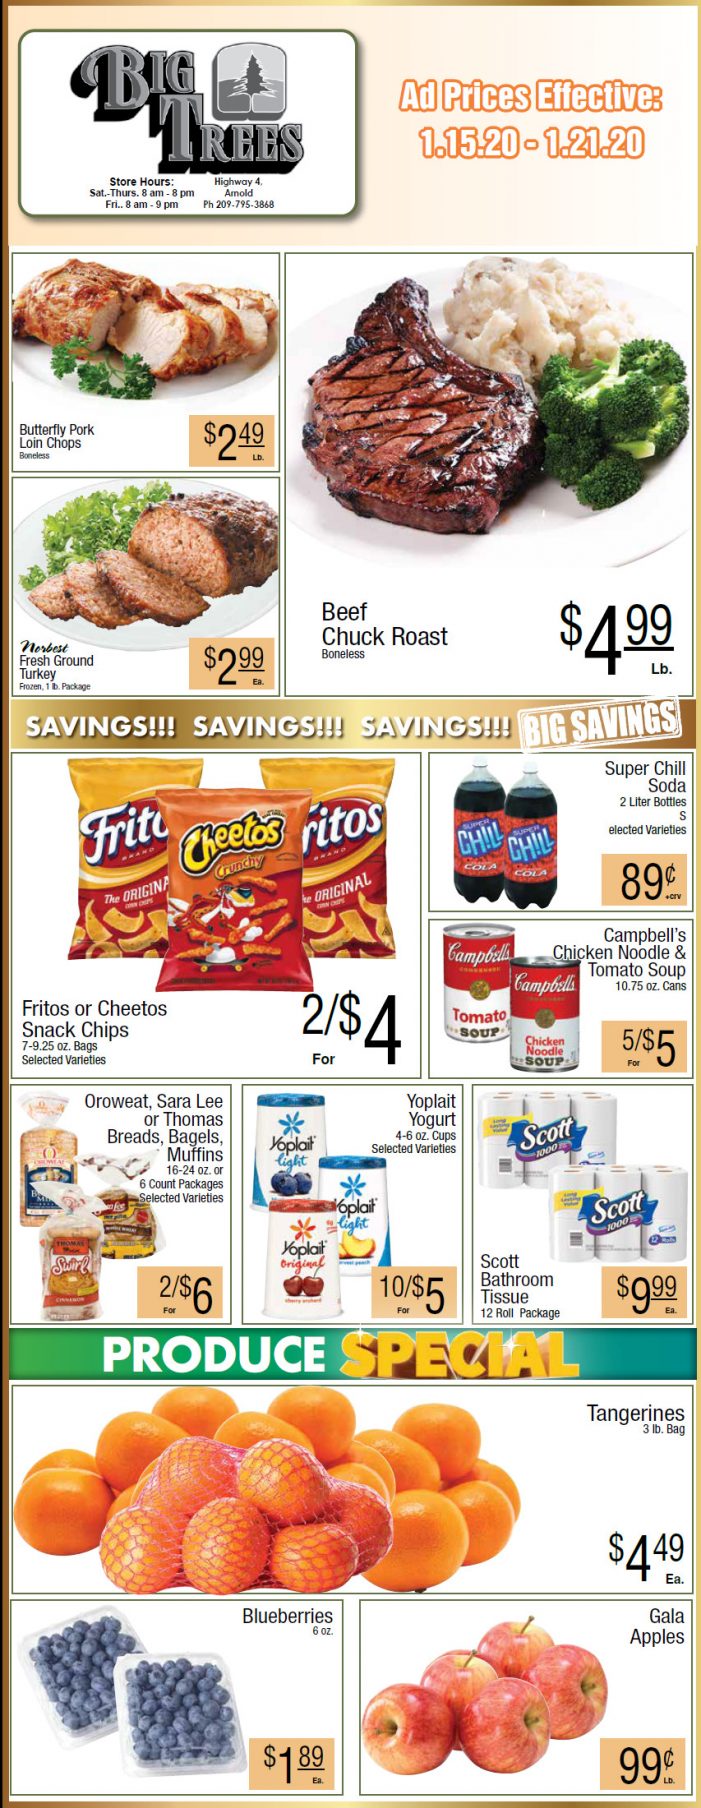 Big Trees Market Weekly Ad & Grocery Specials Through January 21st